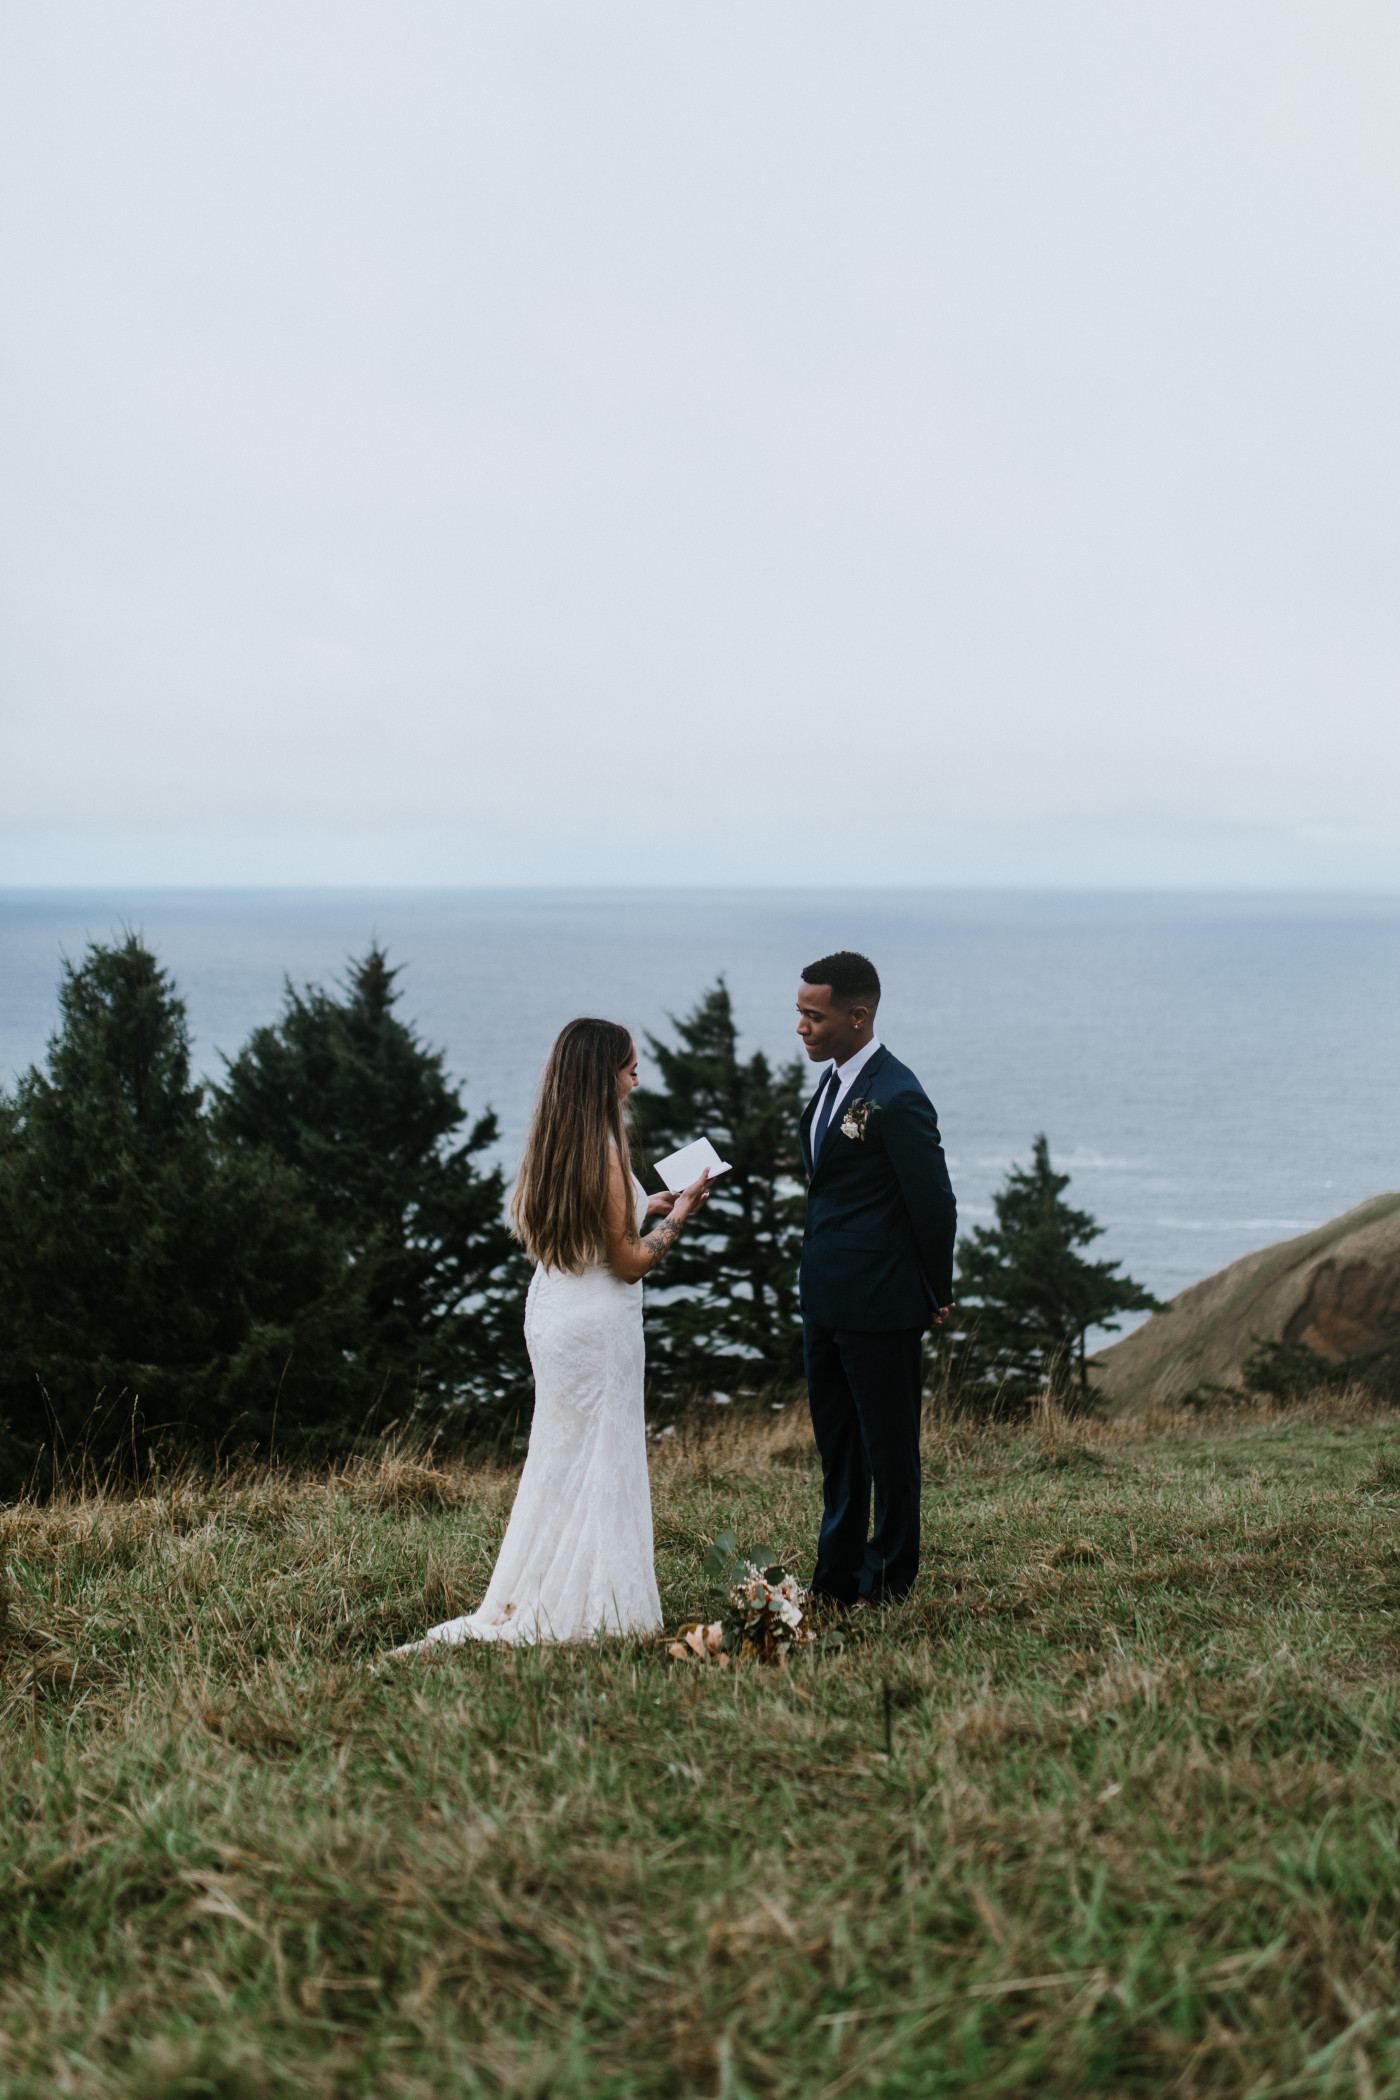 Deandre listens to Ariana during their elopement. Elopement photography at Mount Hood by Sienna Plus Josh.